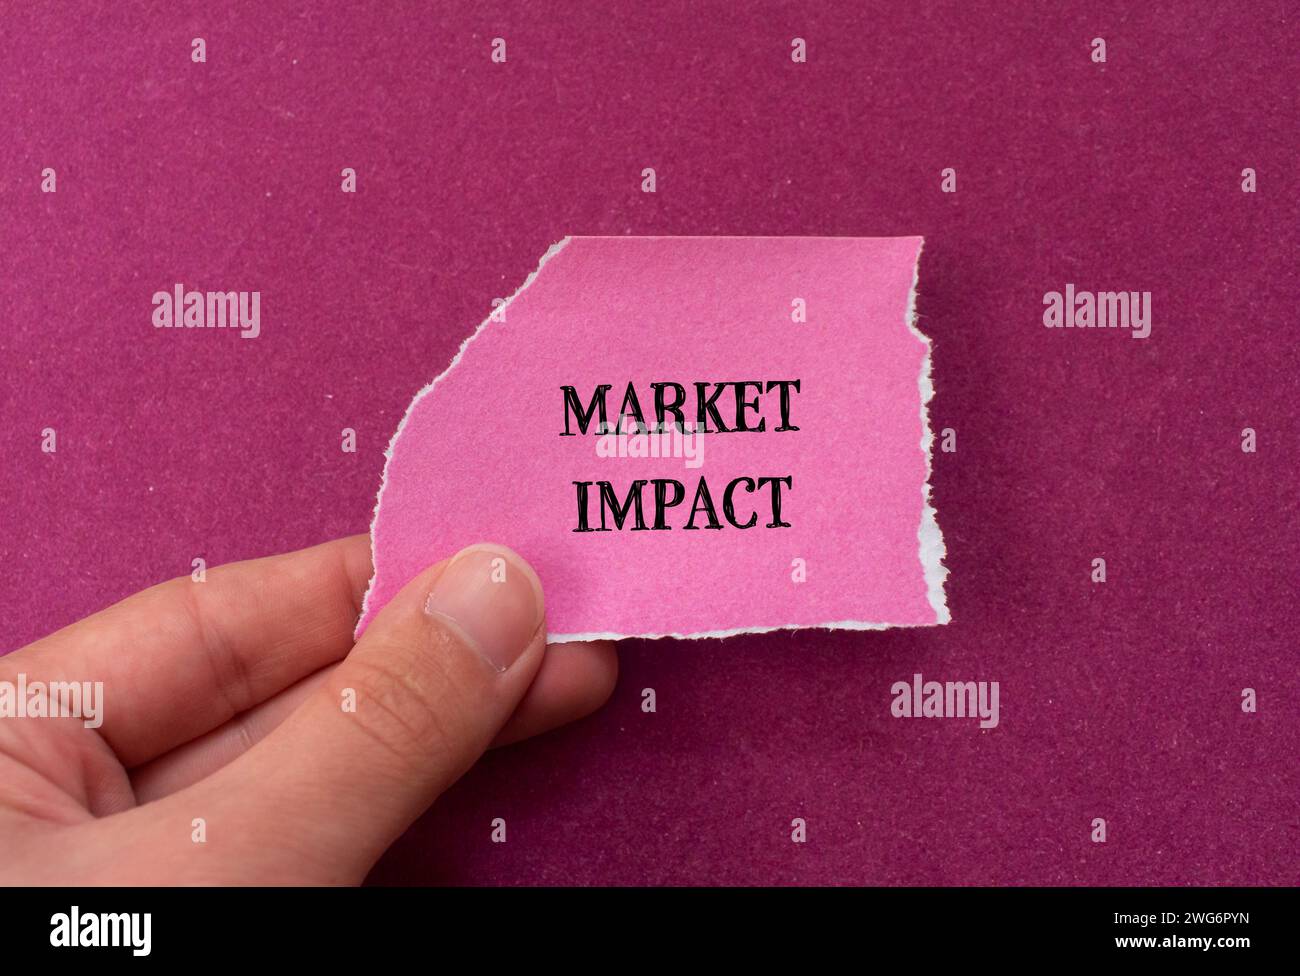 Market impact lettering on ripped paper with purple background. Conceptual business symbol. Top view, copy space. Stock Photo